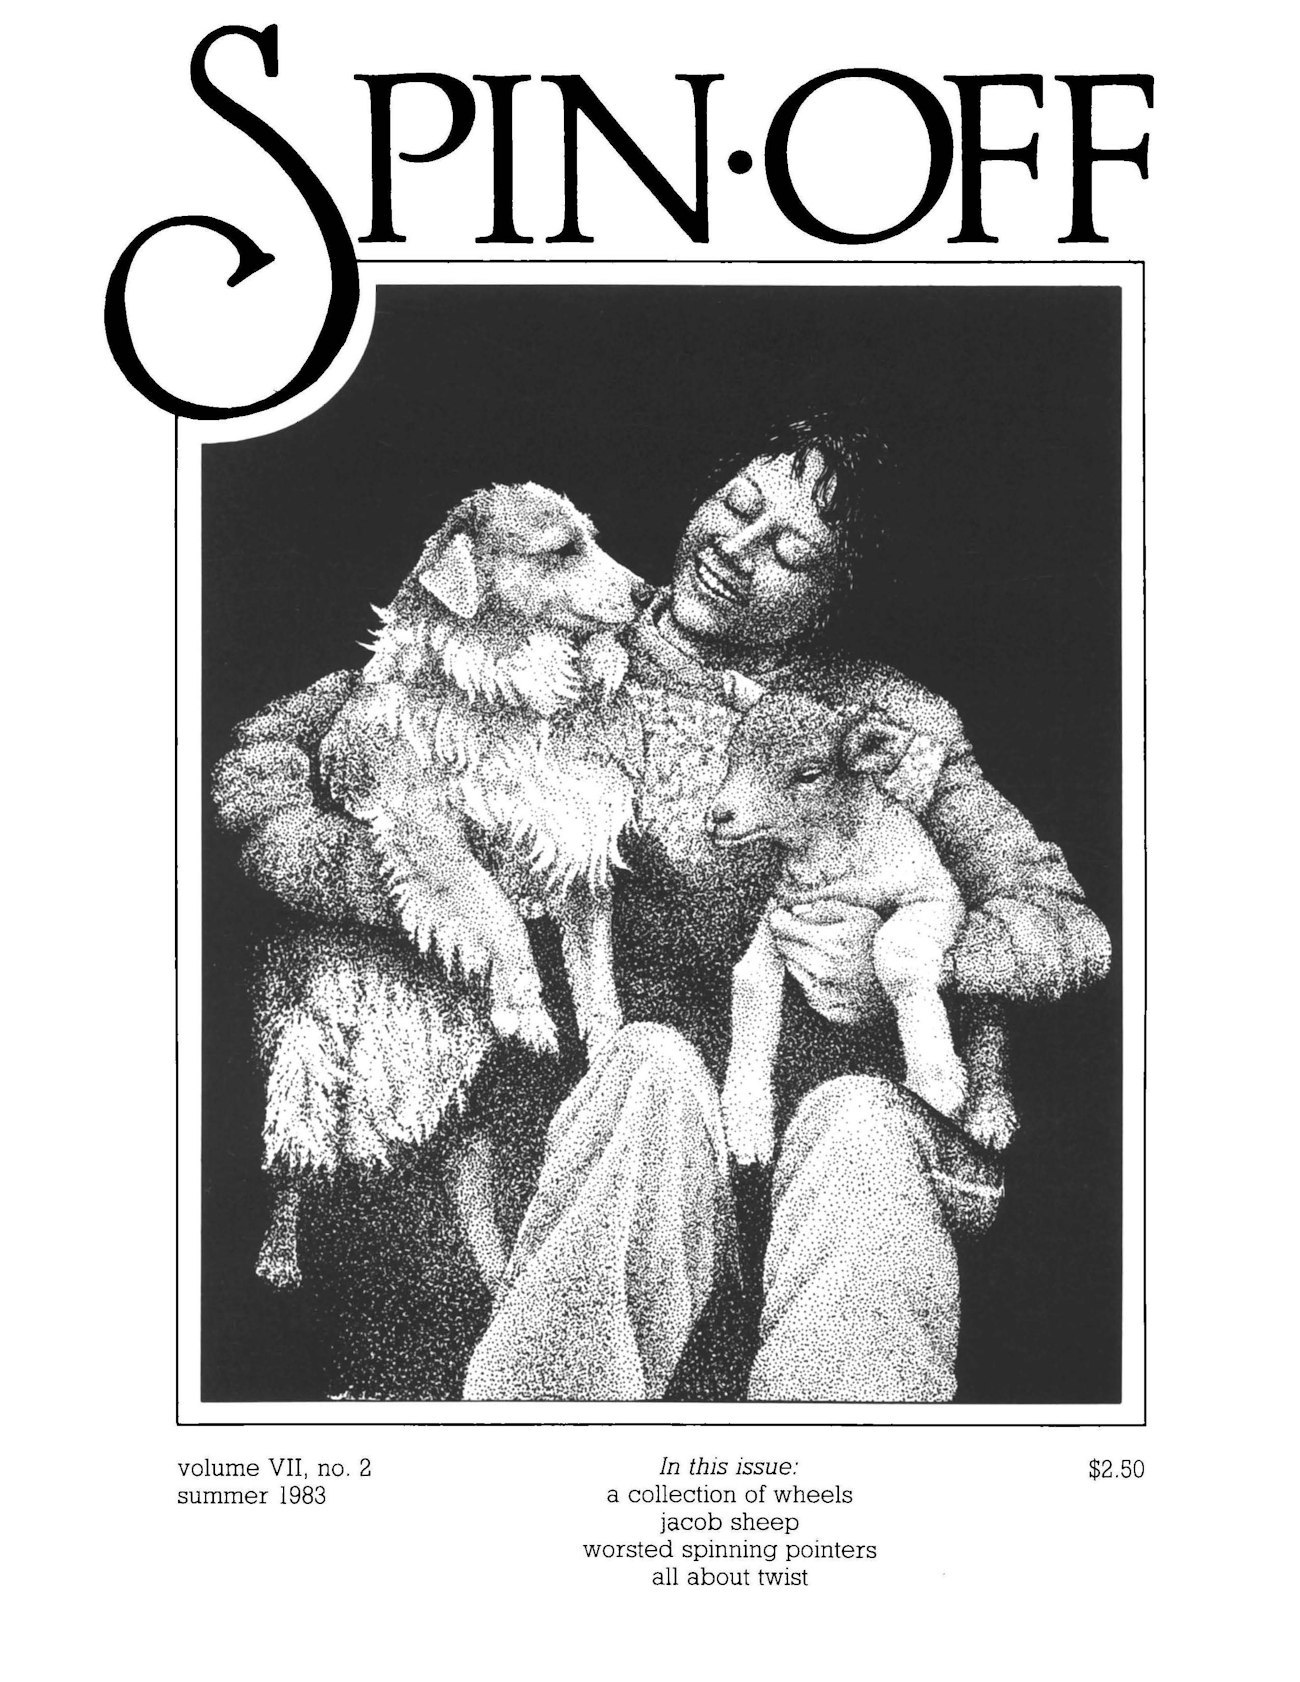 Cover of Spin Off magazine showing a black-and-white hand-drawn grayscale portrait of a dog, woman, and lamb